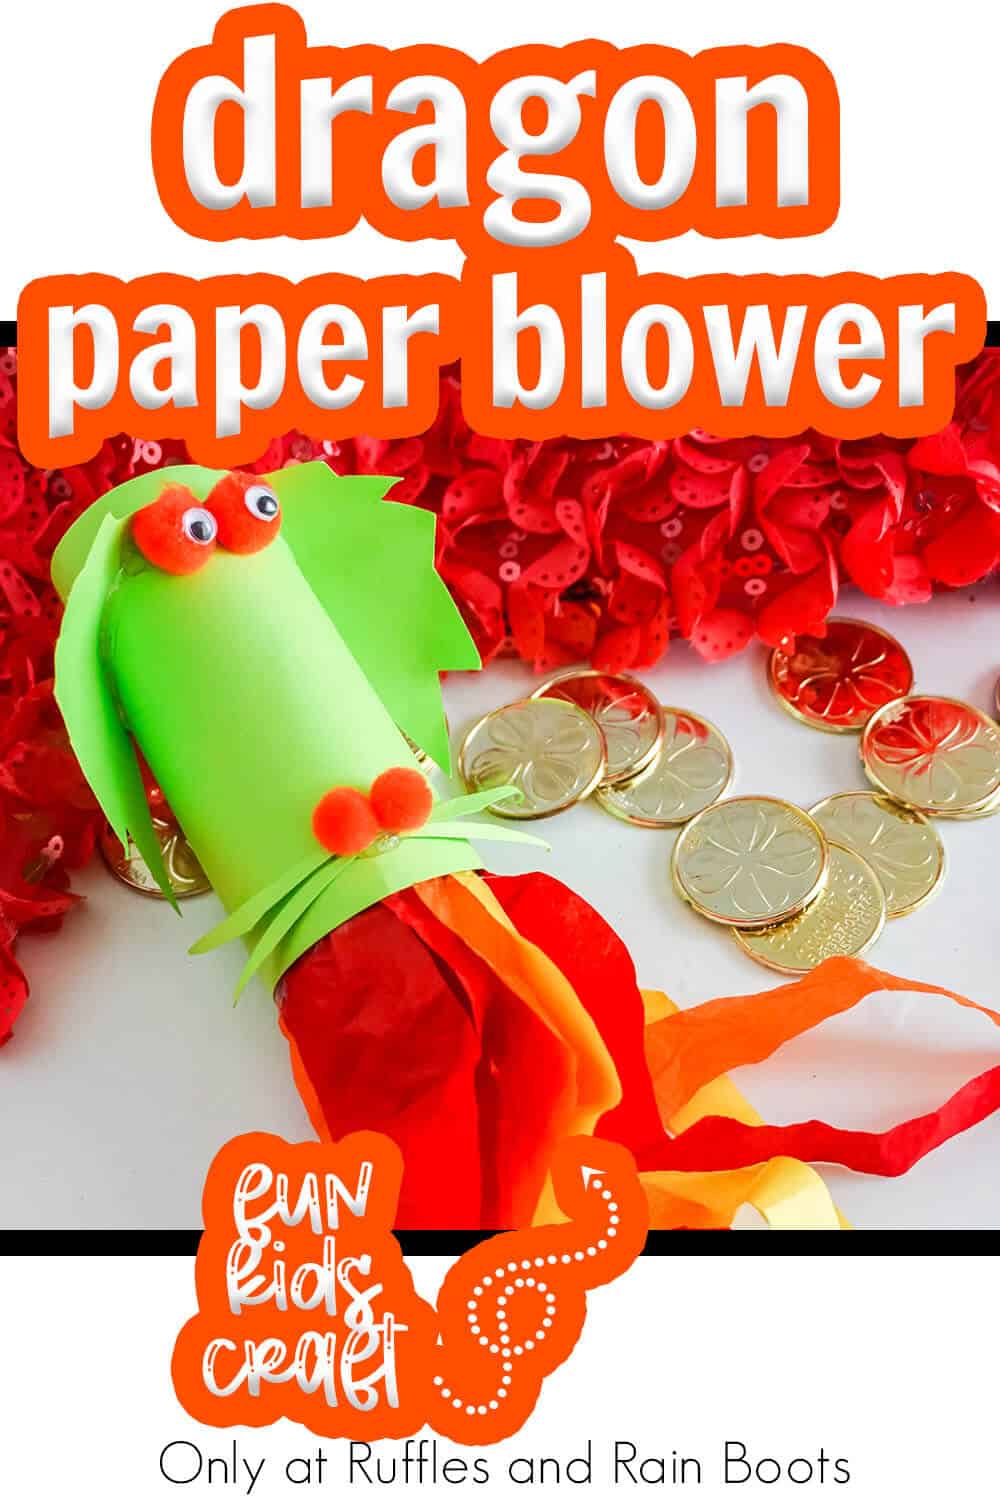 Kids craft fire breathing dragon blower with text which reads dragon paper blower kids paper craft.